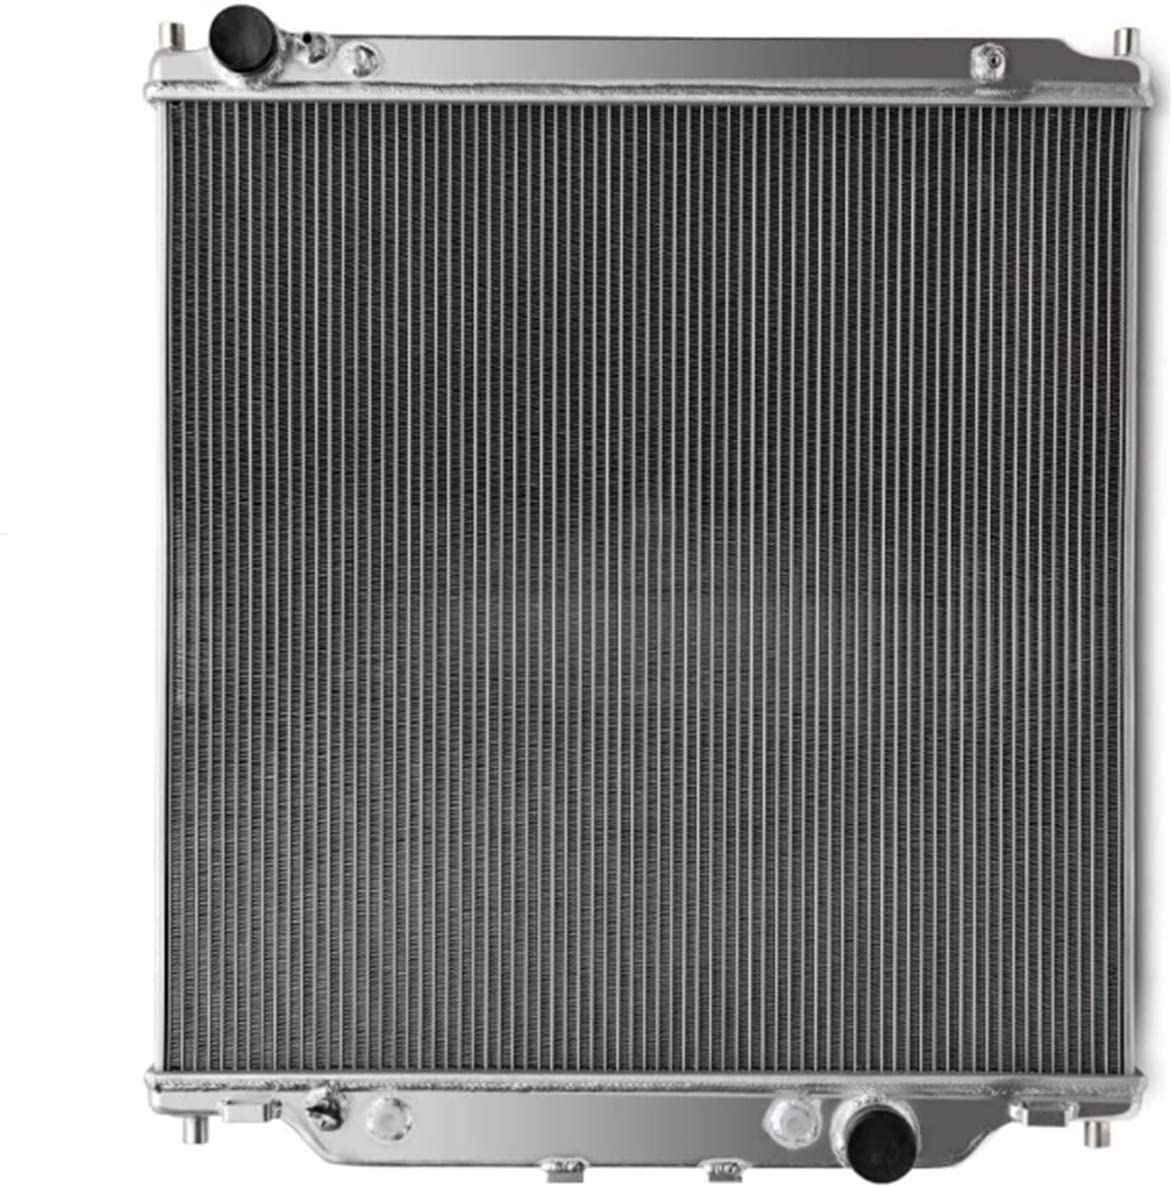 CoolingSky 2 Row All Aluminum Radiator for 2003-2007 Ford F250, F350 Super Duty 6.0丨2003-05 Excursion 6.0L (fits: Turbo Diesel Powerstroke Engine)